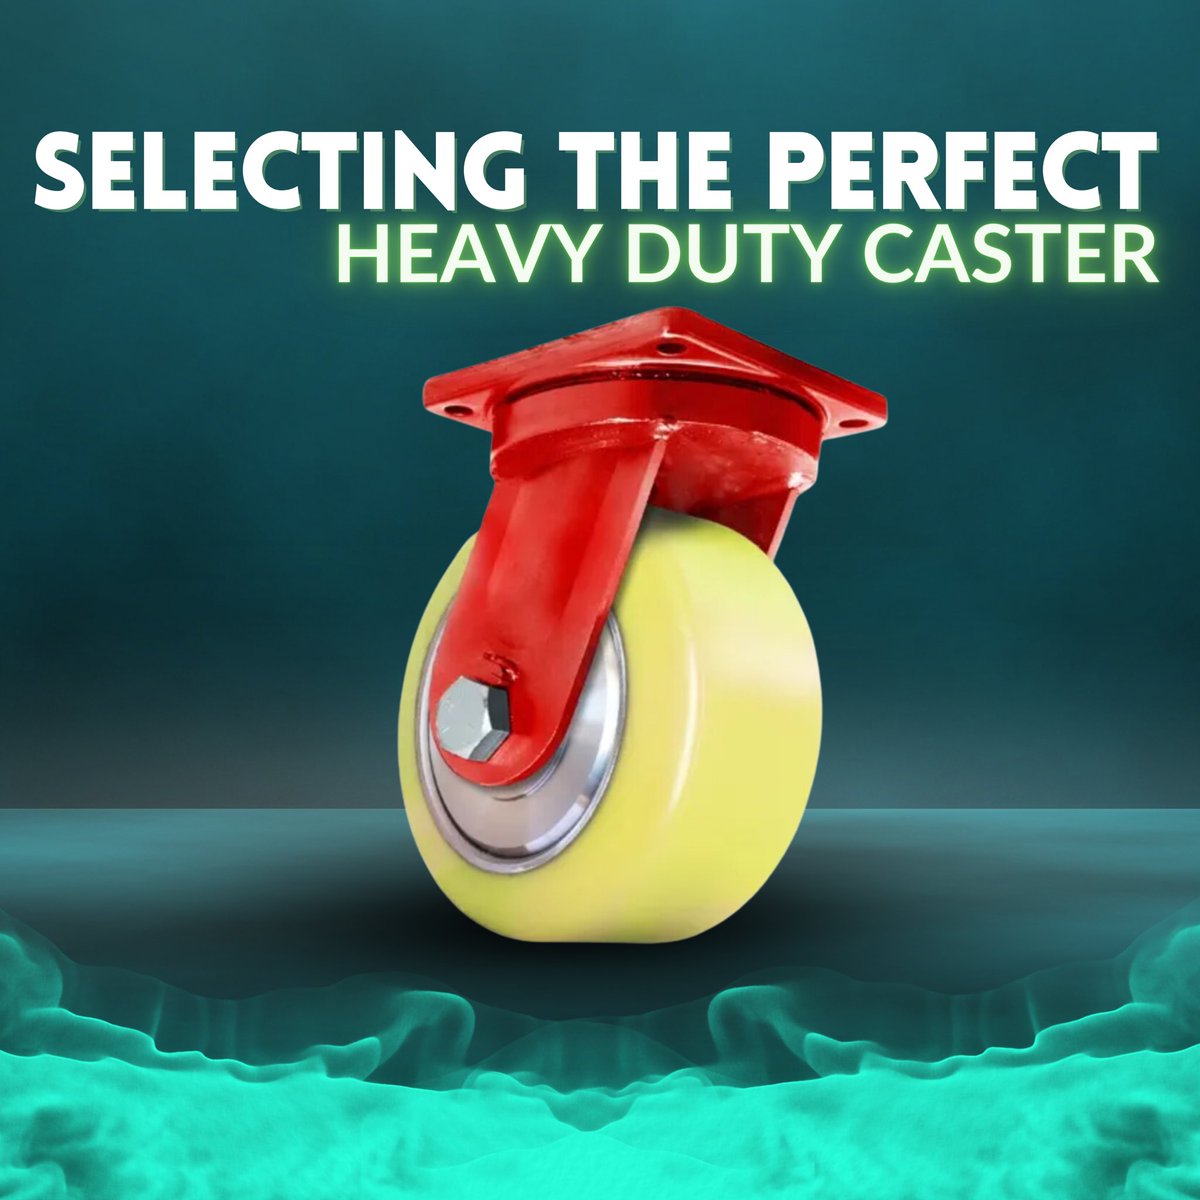 Need help finding the perfect heavy duty caster for your specific industry? From manufacturing to aviation, we’ve got you covered! Check out our blog on how to choose the ideal heavy duty casters for your needs: bit.ly/selecting-heav… #HeavyDutyCasters #Manufacturing #Aviation